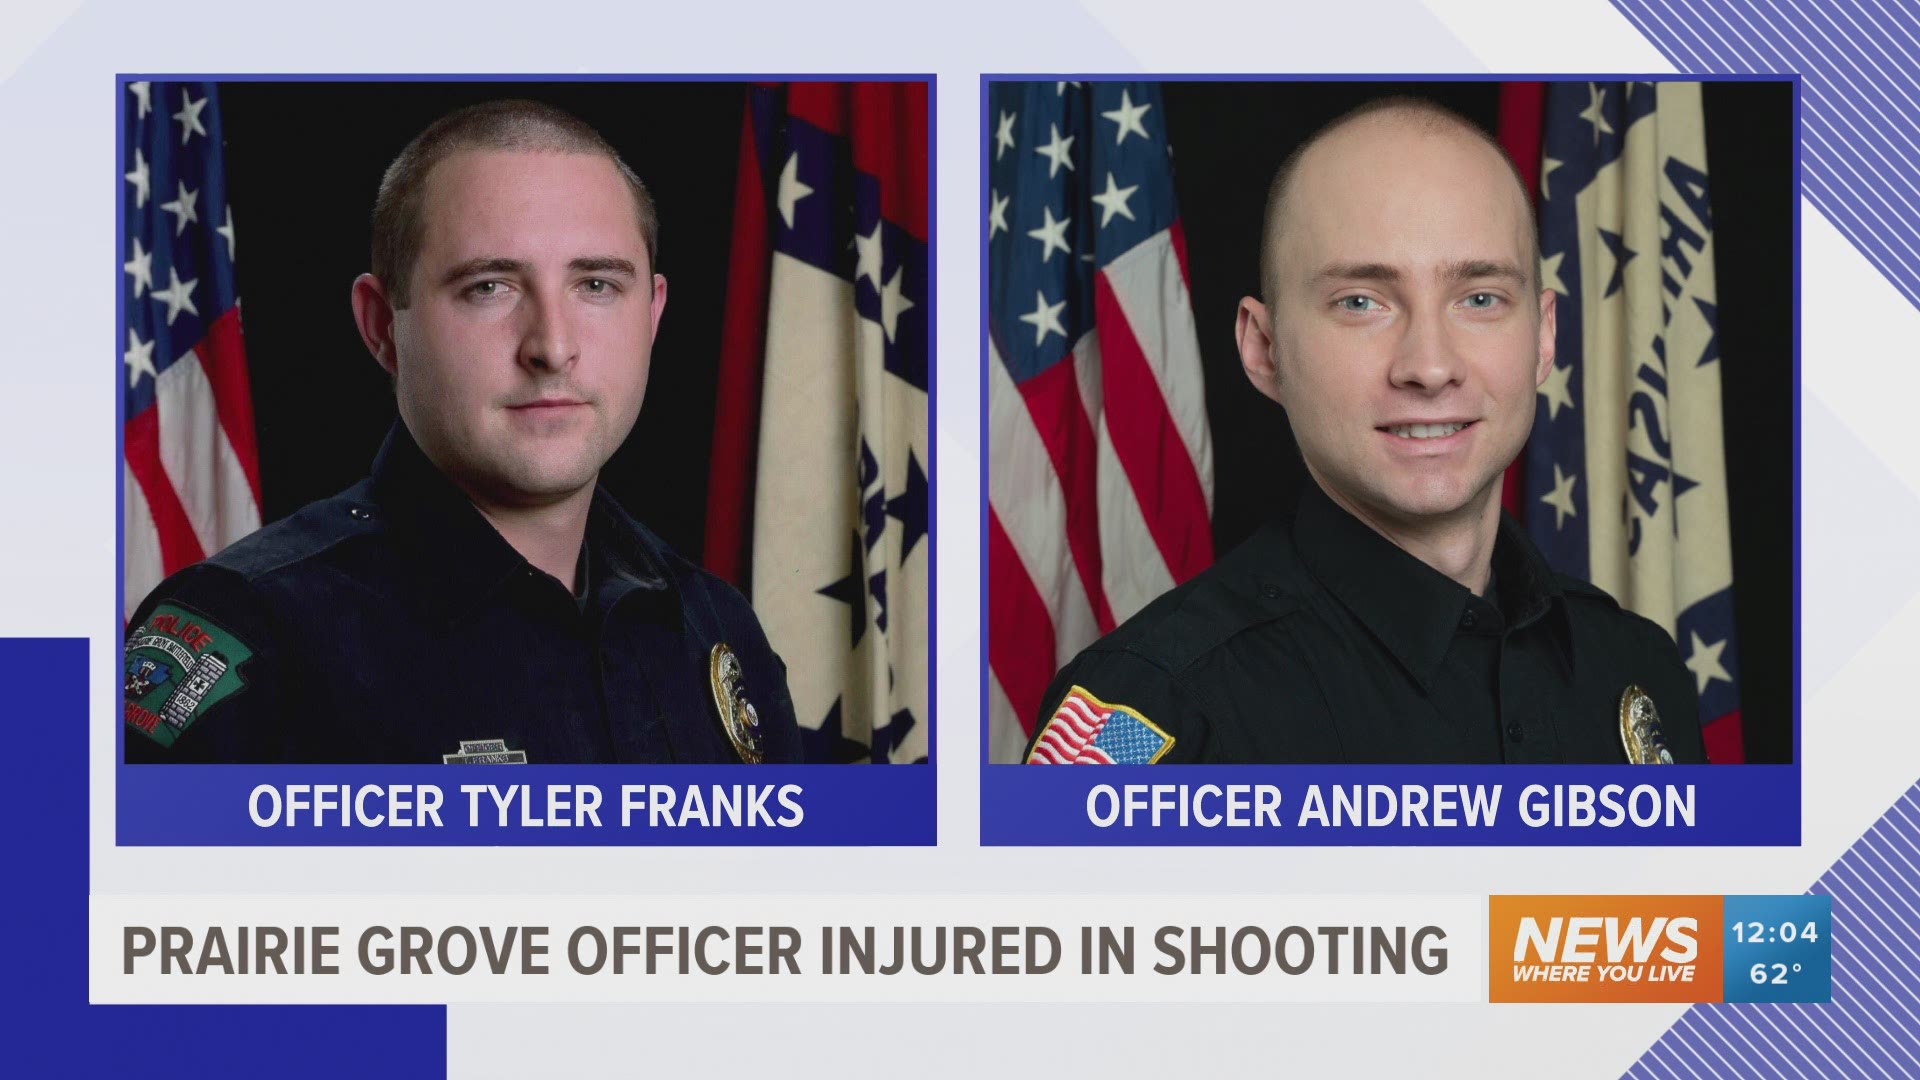 Officer Andrew Gibson was able to remove Officer Tyler Franks from the house and immediately applied two tourniquets, which is credited for saving Franks' life.